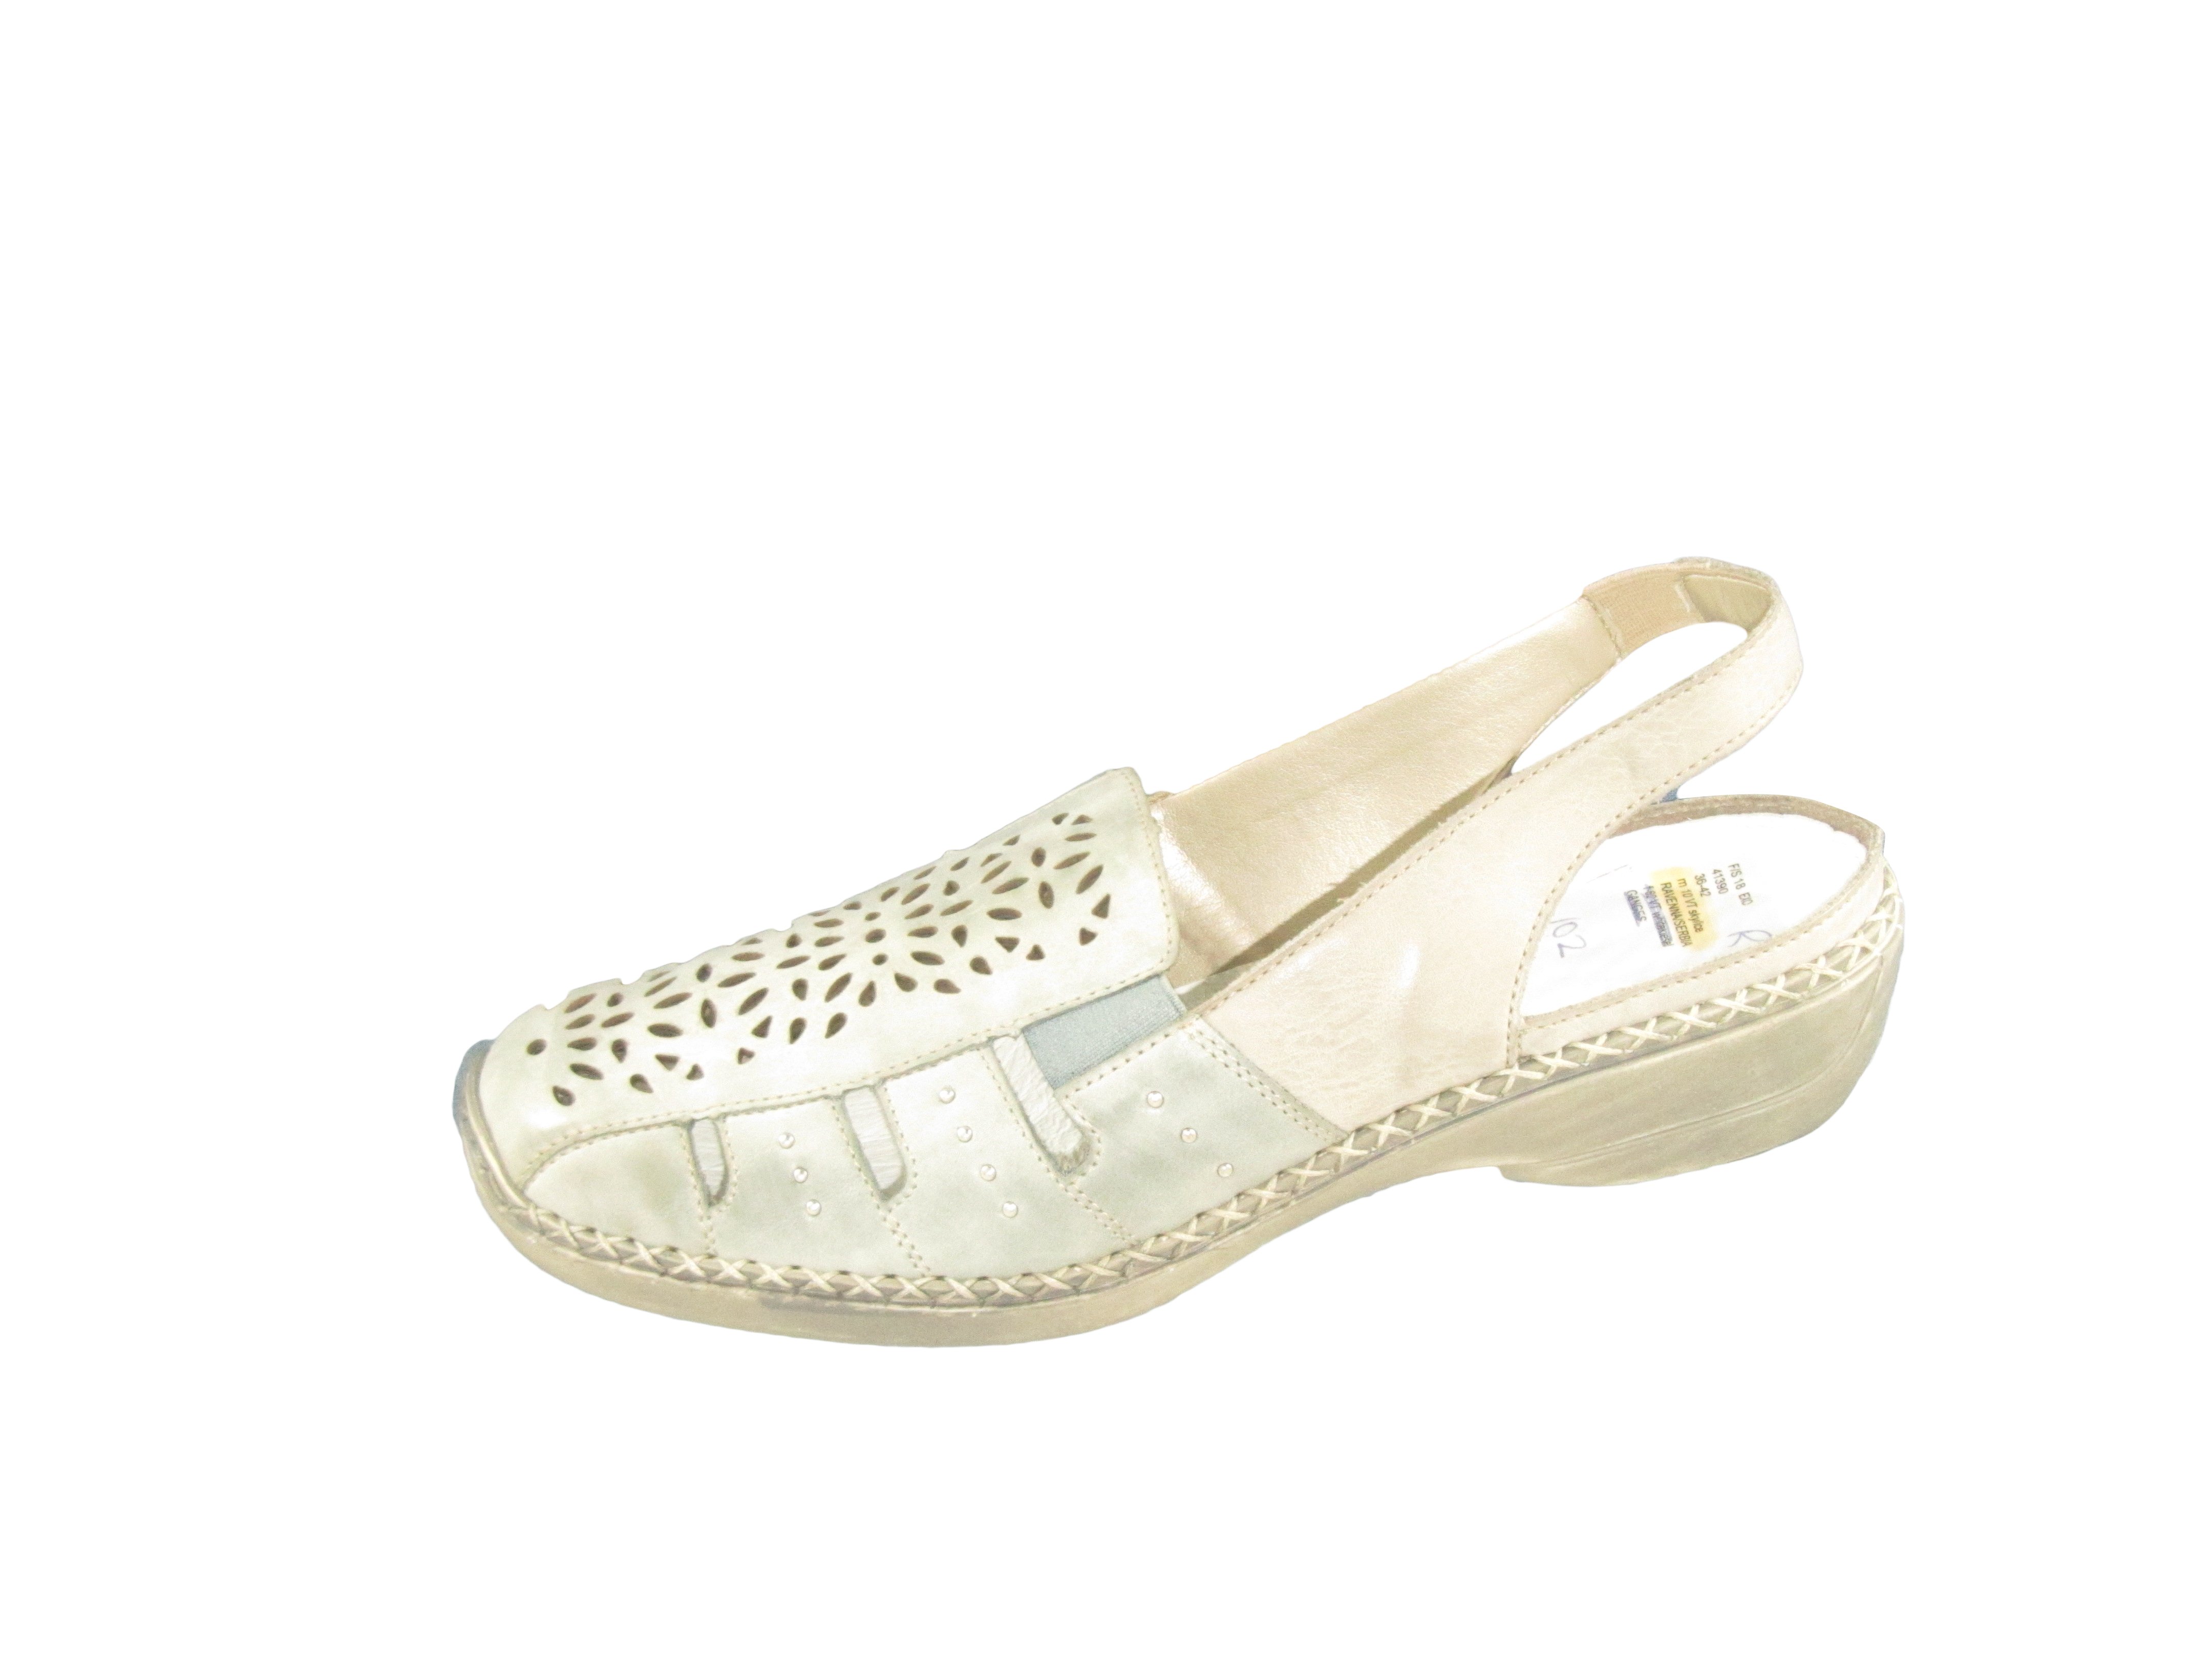 41390 RIEKER - WOMENS SHOES-SHOES - low to flat : Shirley's Shoes ...